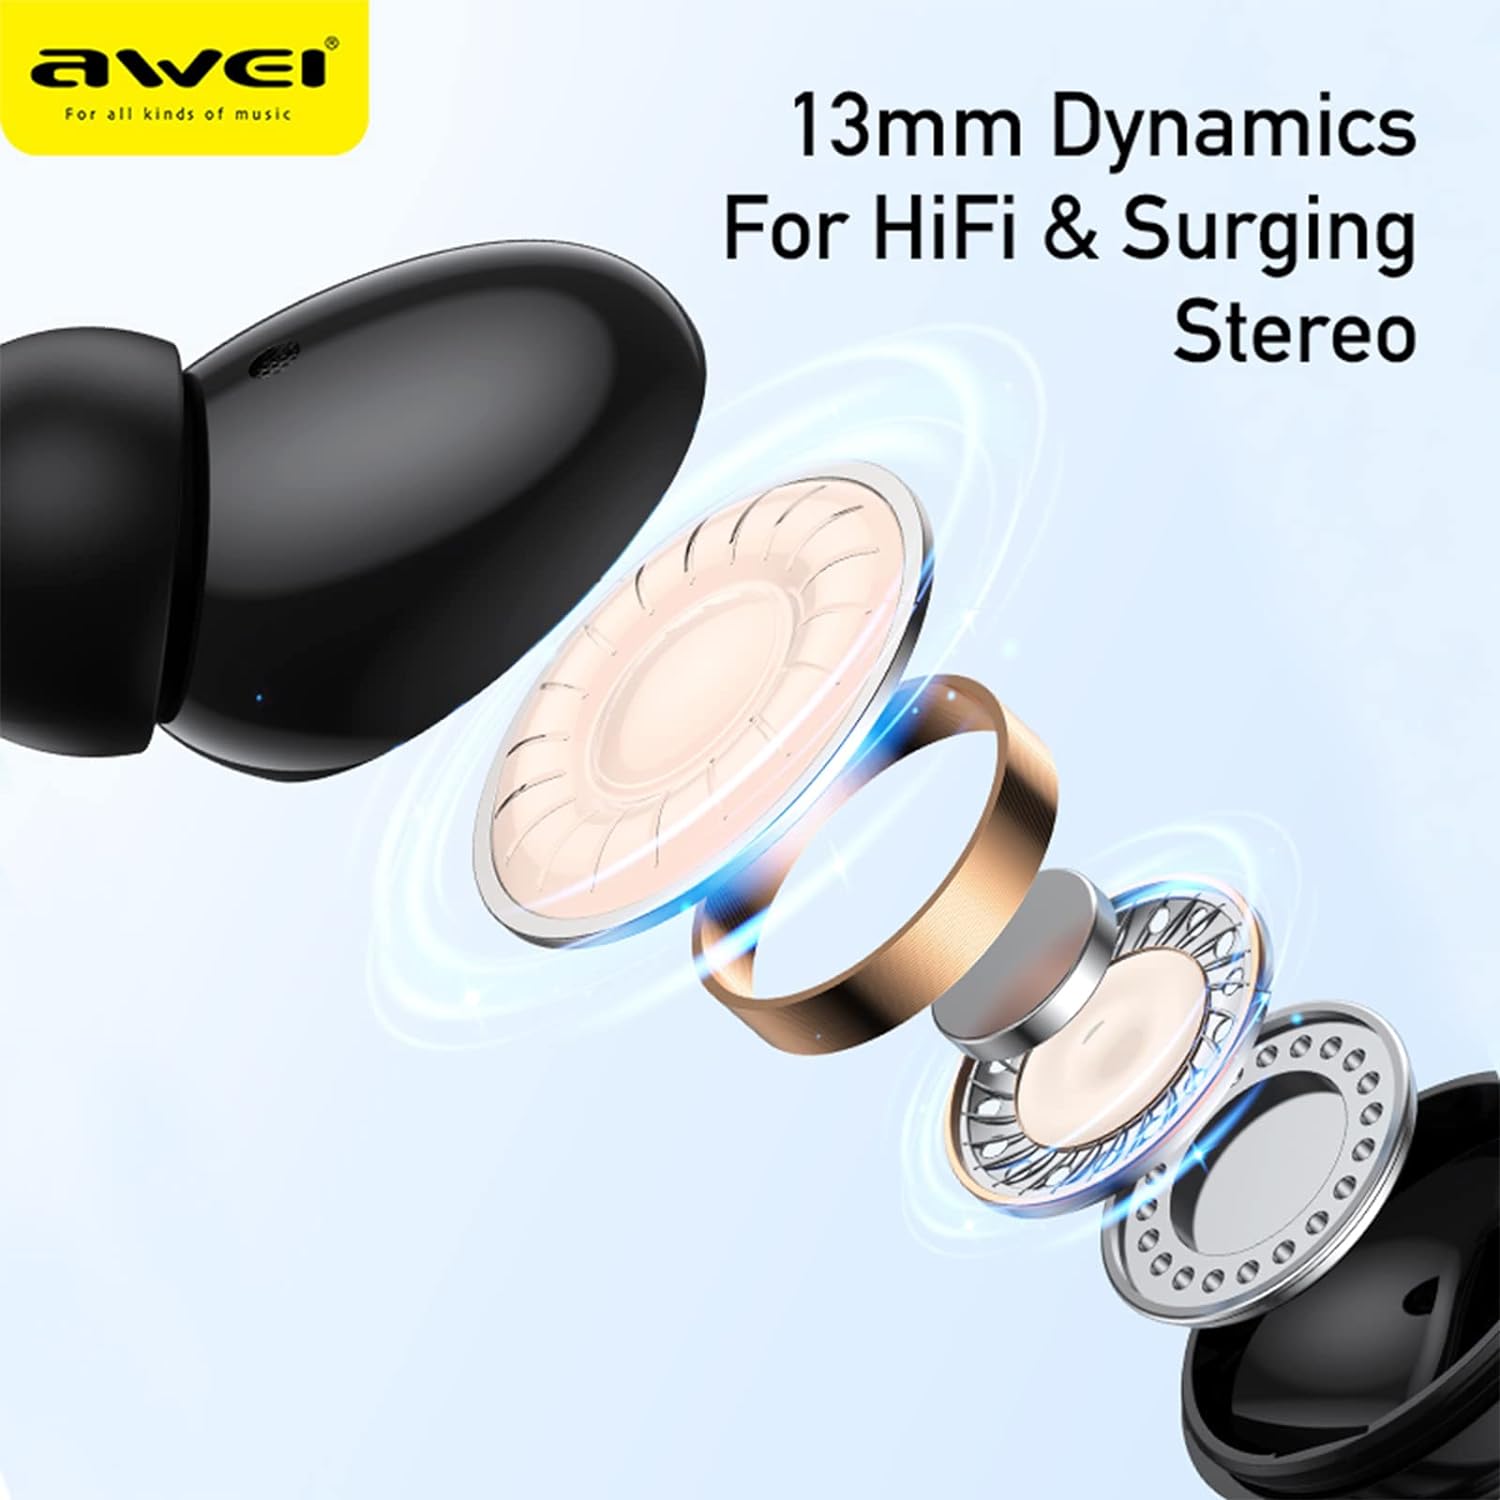 AWEI Wireless Bluetooth Earbuds And Gaming Earbuds with Microphone - Black